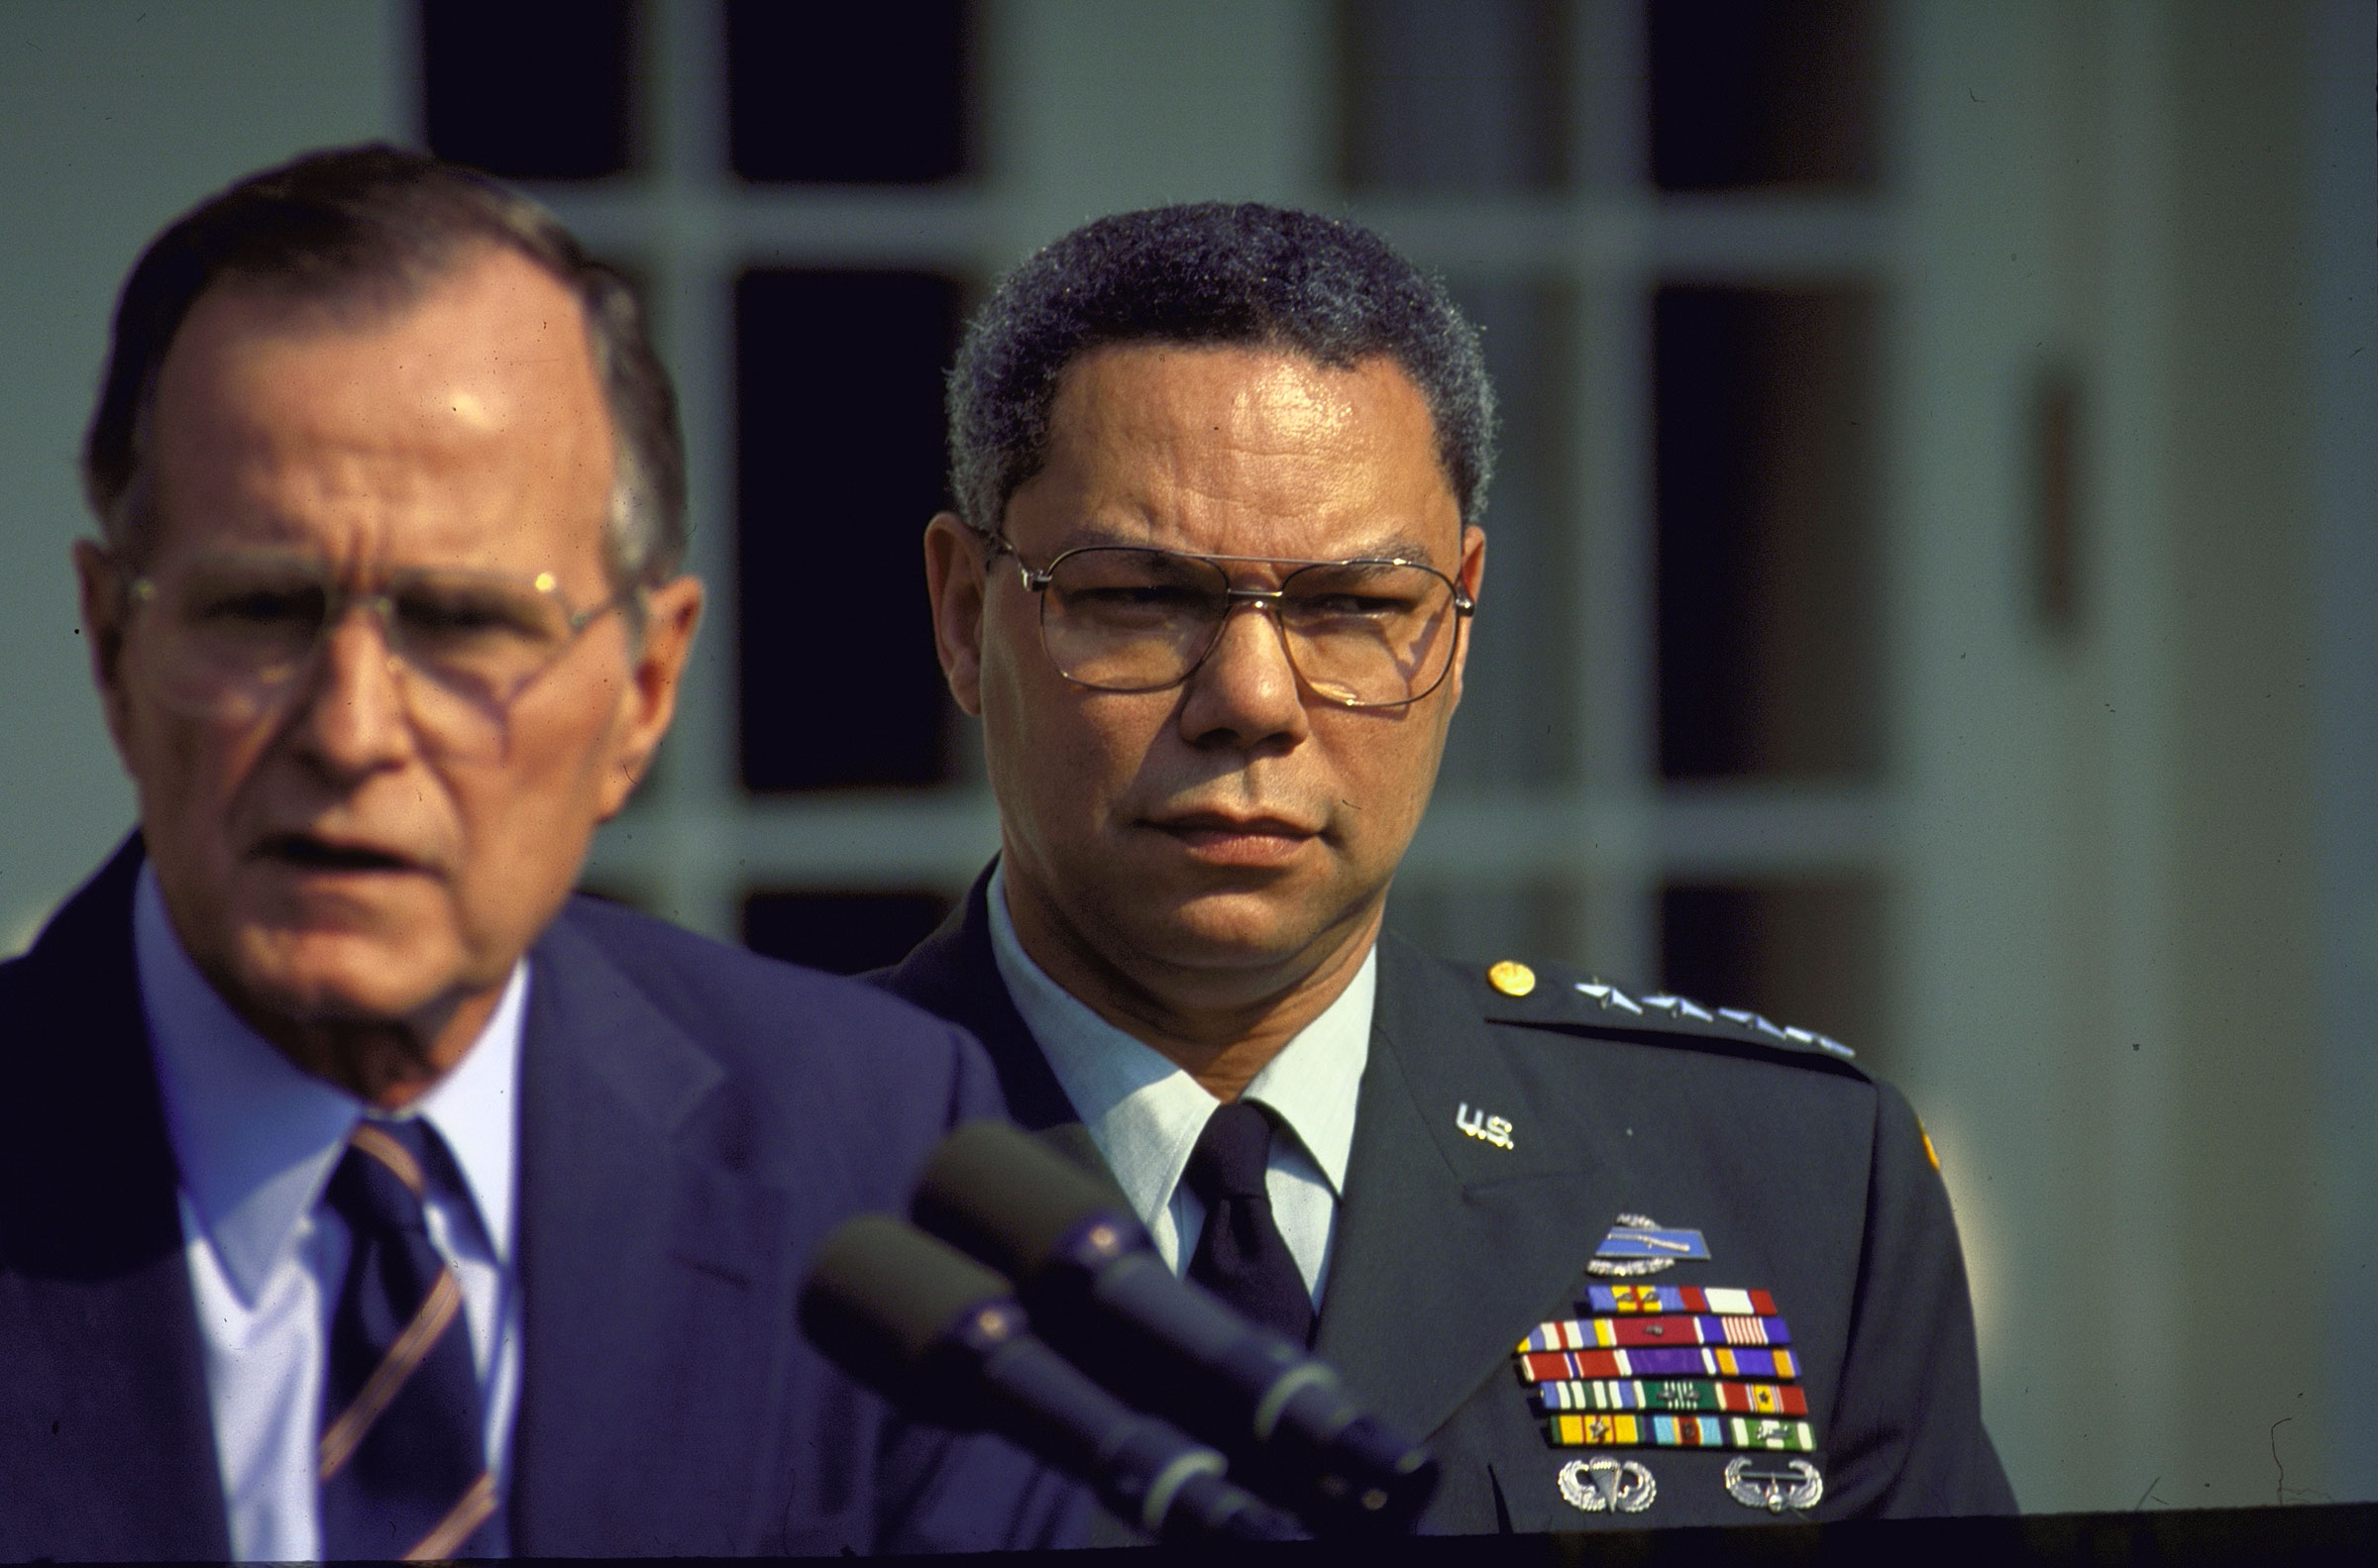 Pres. Bush announcing re-appointment of his Chairman of Joint Chiefs of Staff, Gen. Colin Powell, 1991.